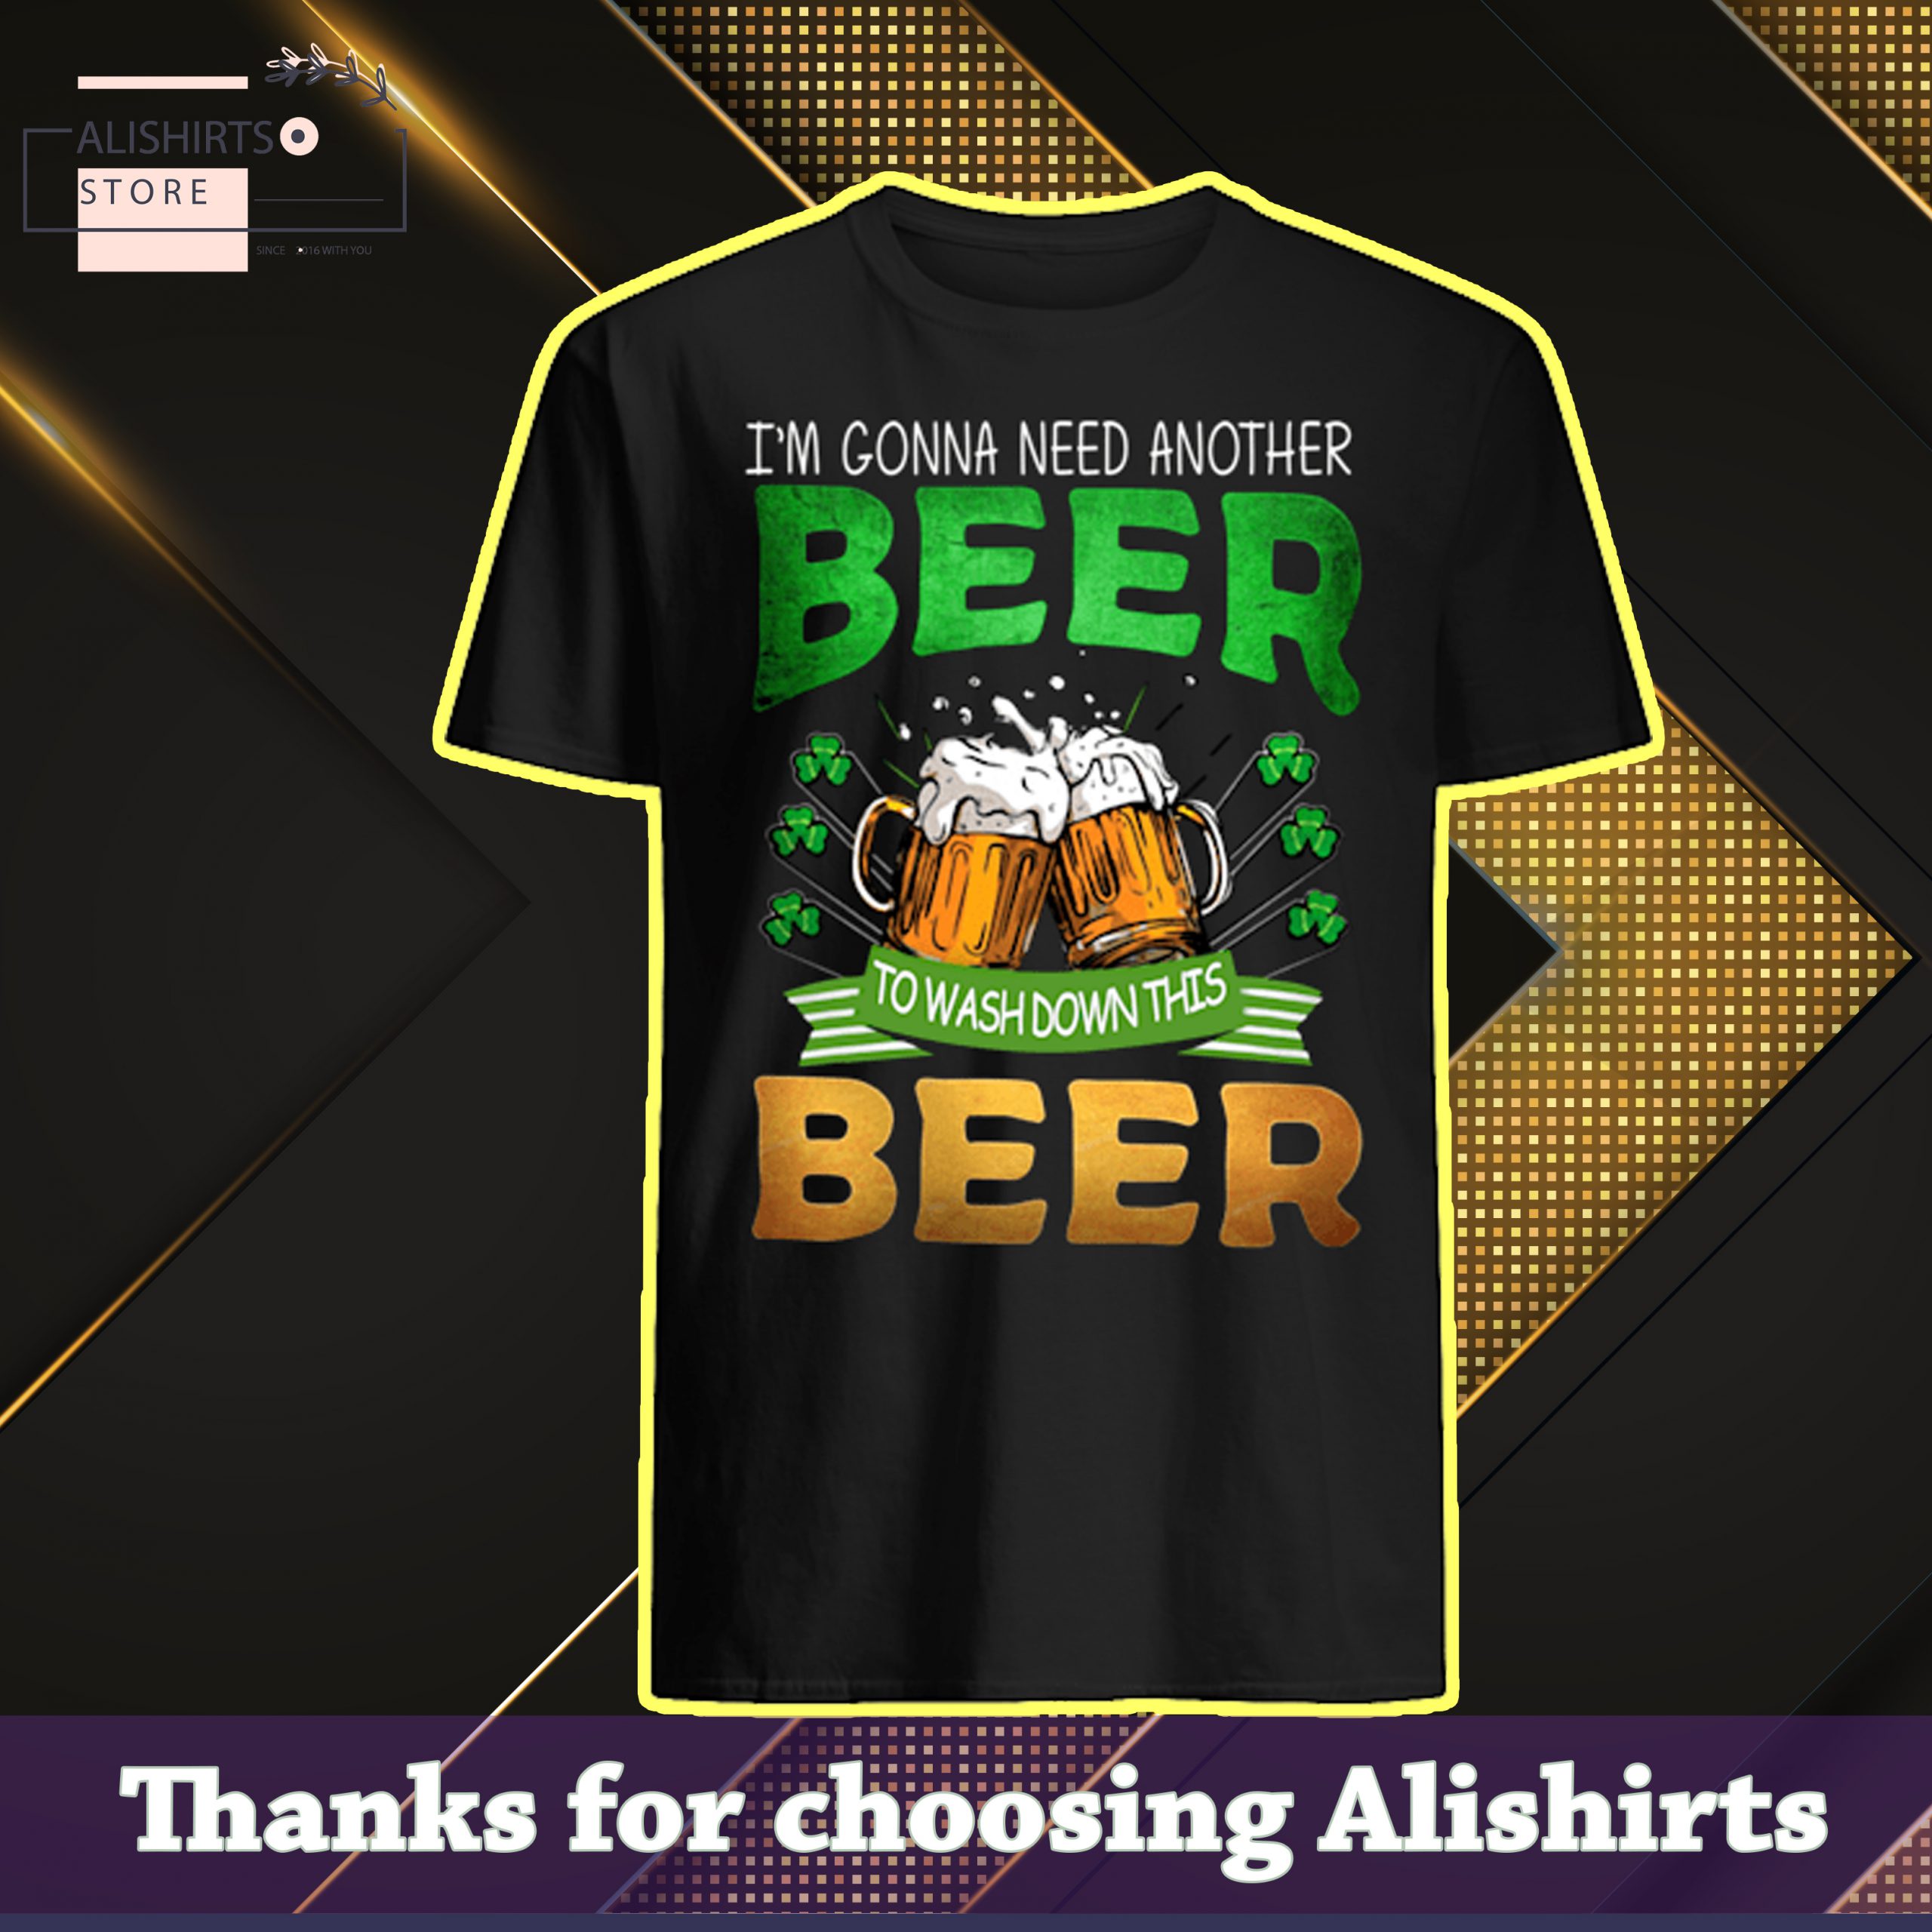 Im gonna need another beer to wash down this beer St.Patricks day shirt